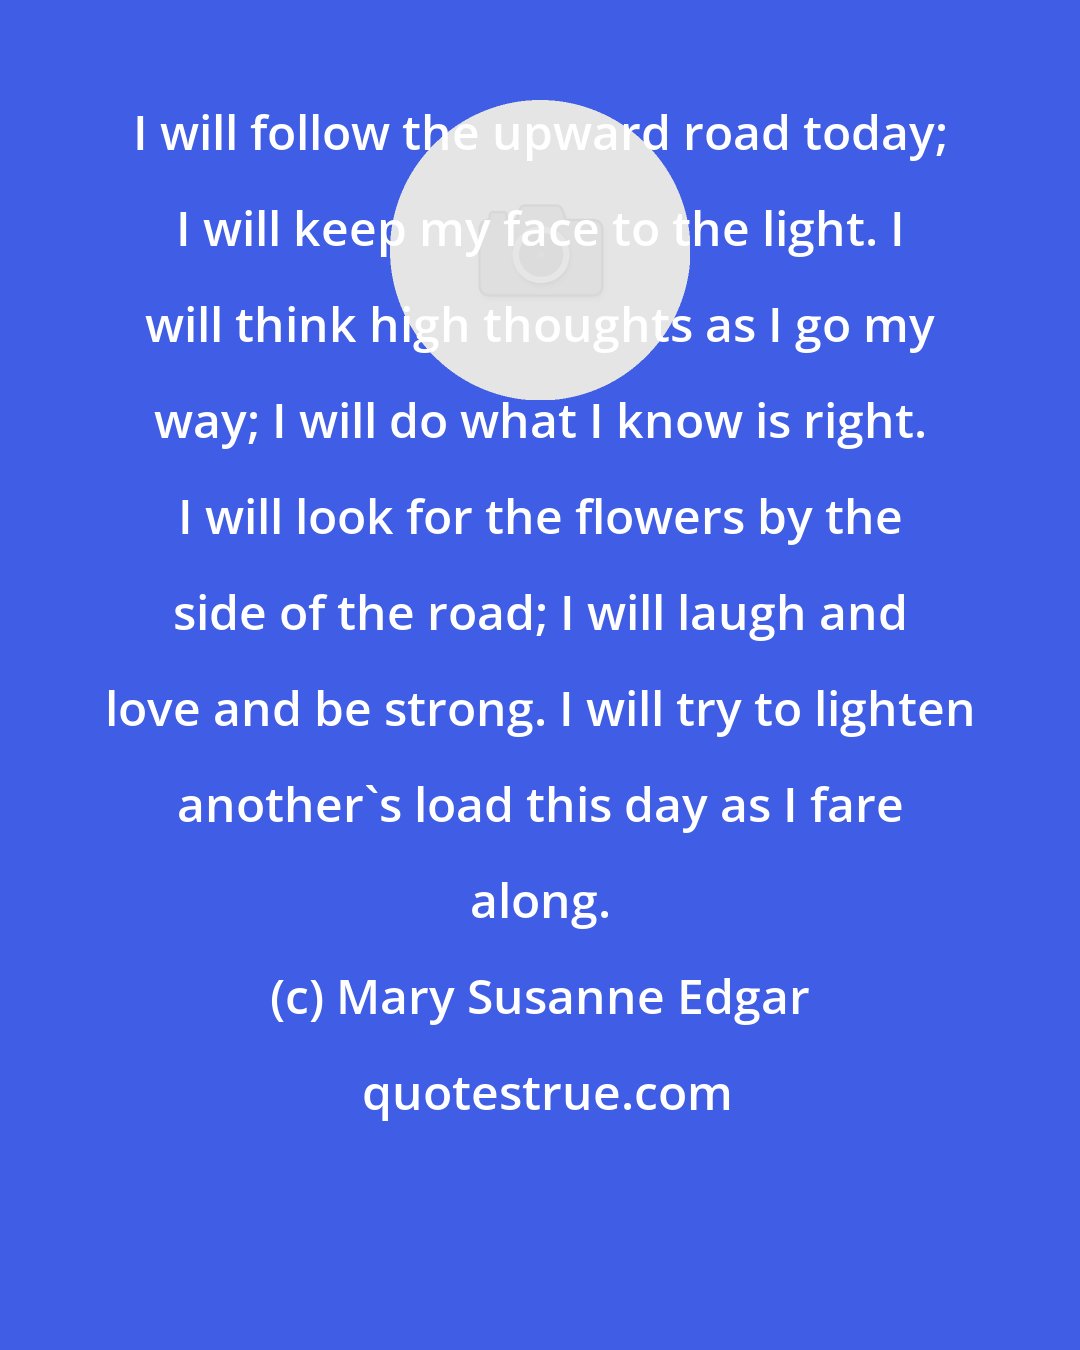 Mary Susanne Edgar: I will follow the upward road today; I will keep my face to the light. I will think high thoughts as I go my way; I will do what I know is right. I will look for the flowers by the side of the road; I will laugh and love and be strong. I will try to lighten another's load this day as I fare along.